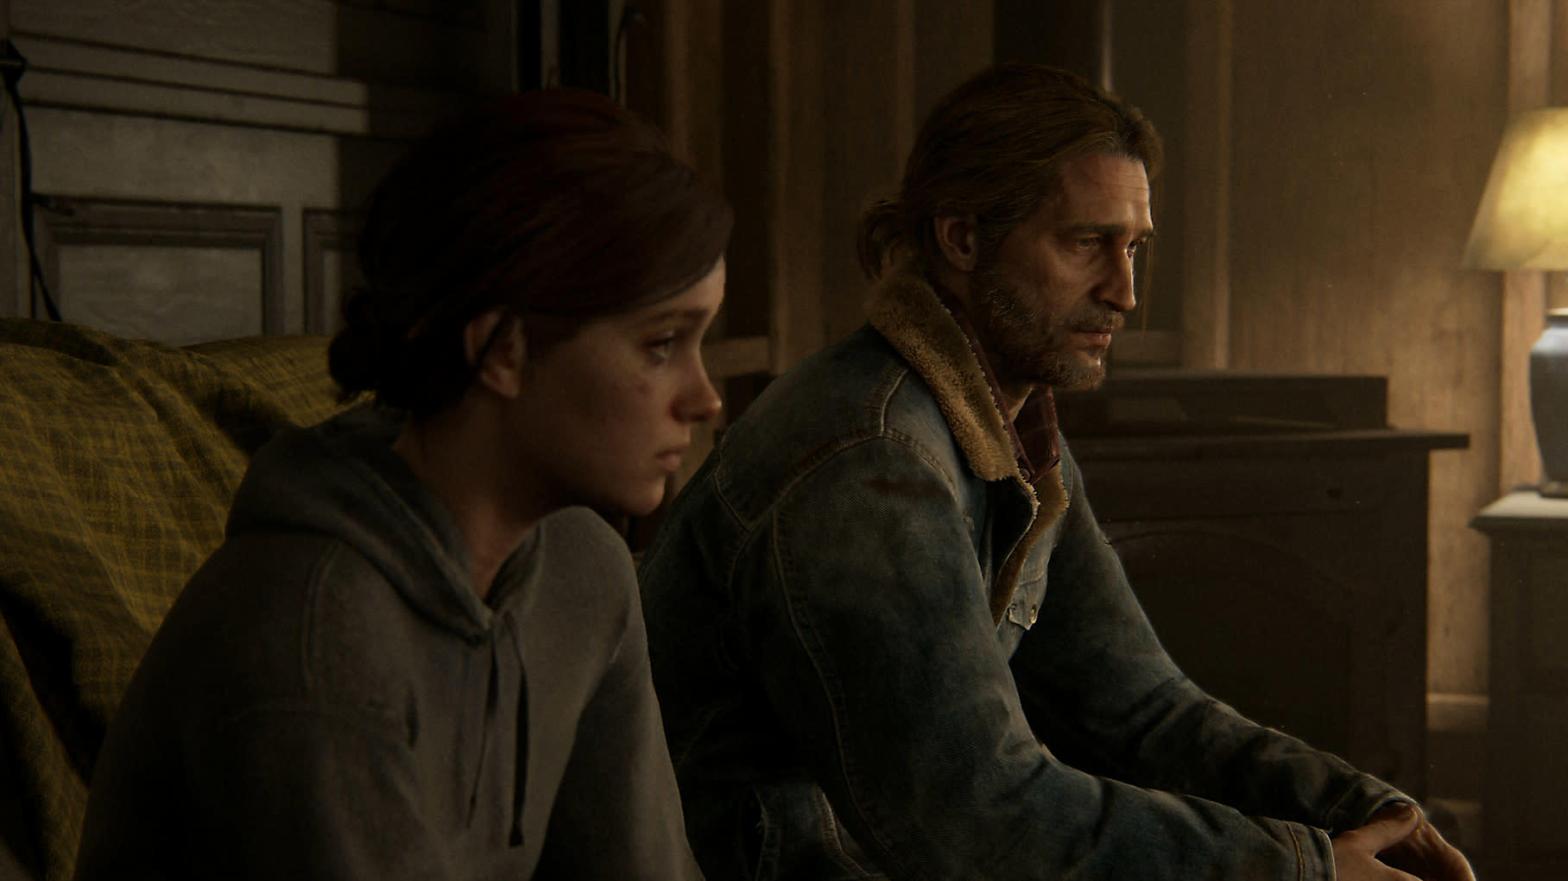 A scene from The Last of Us. (Image: Naughty Dog)